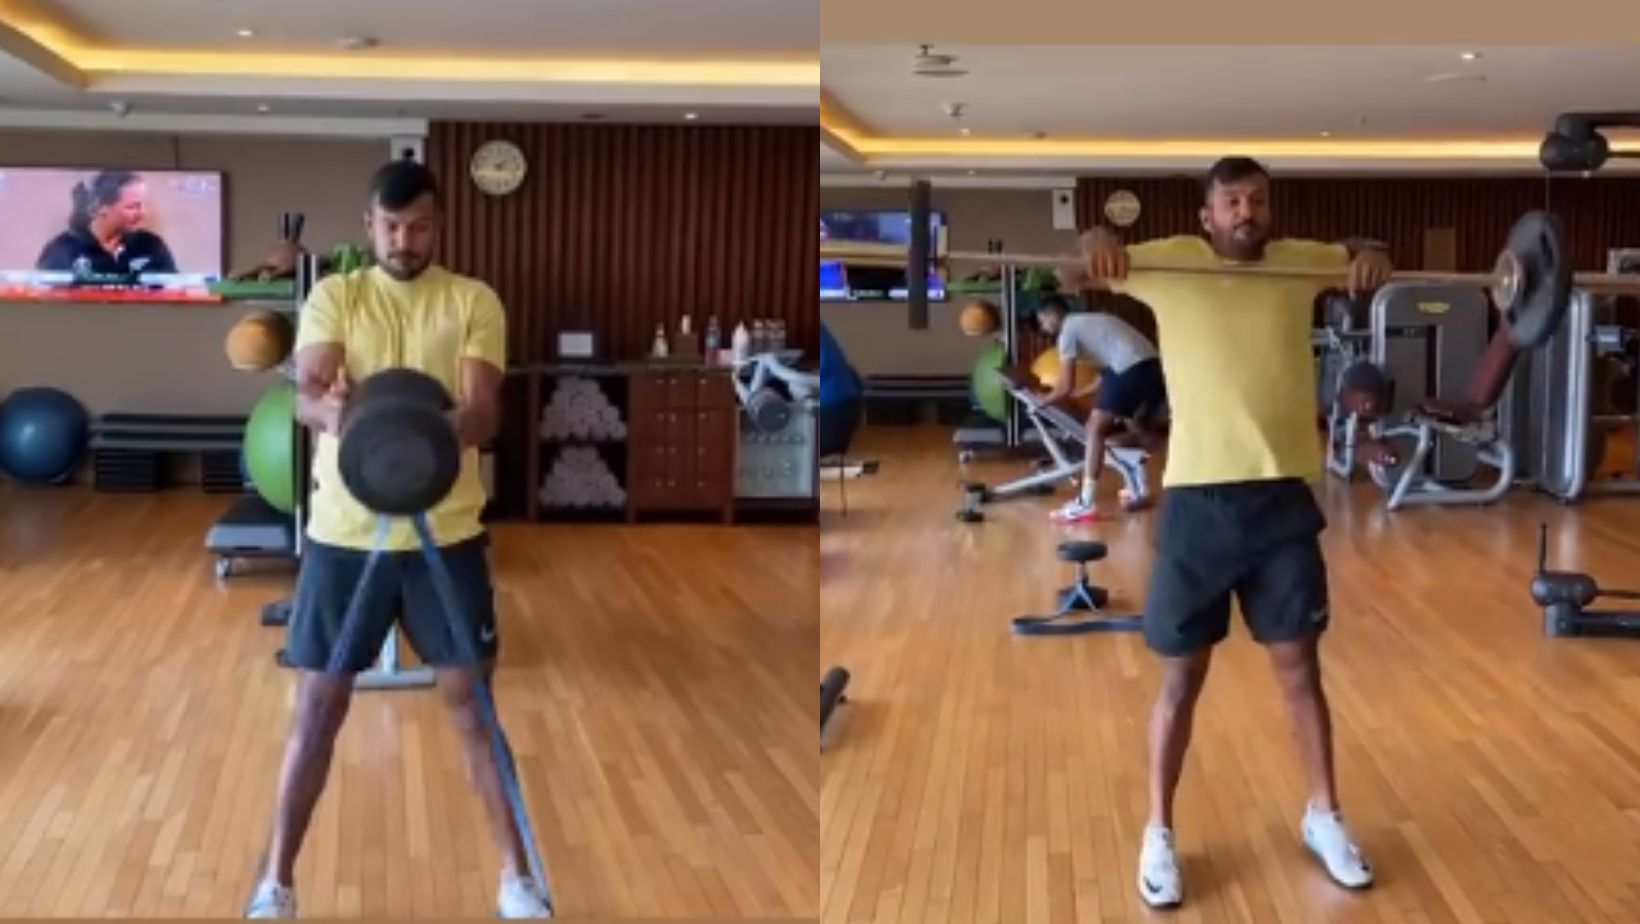 Mayank Agarwal sweating it out at the gym on Thursday.